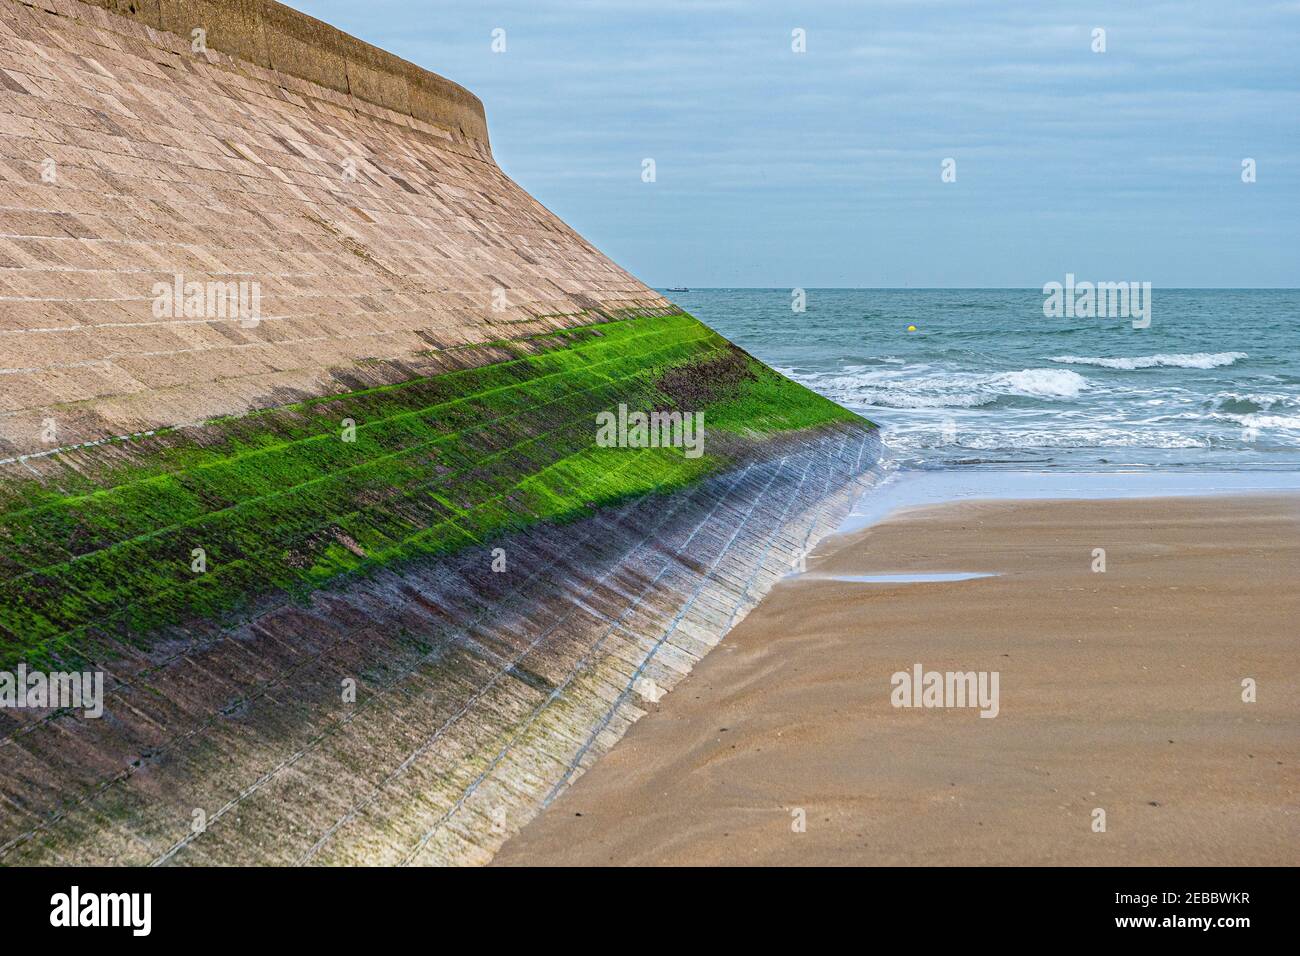 Algae covered wall with vegetation at the beach Stock Photo